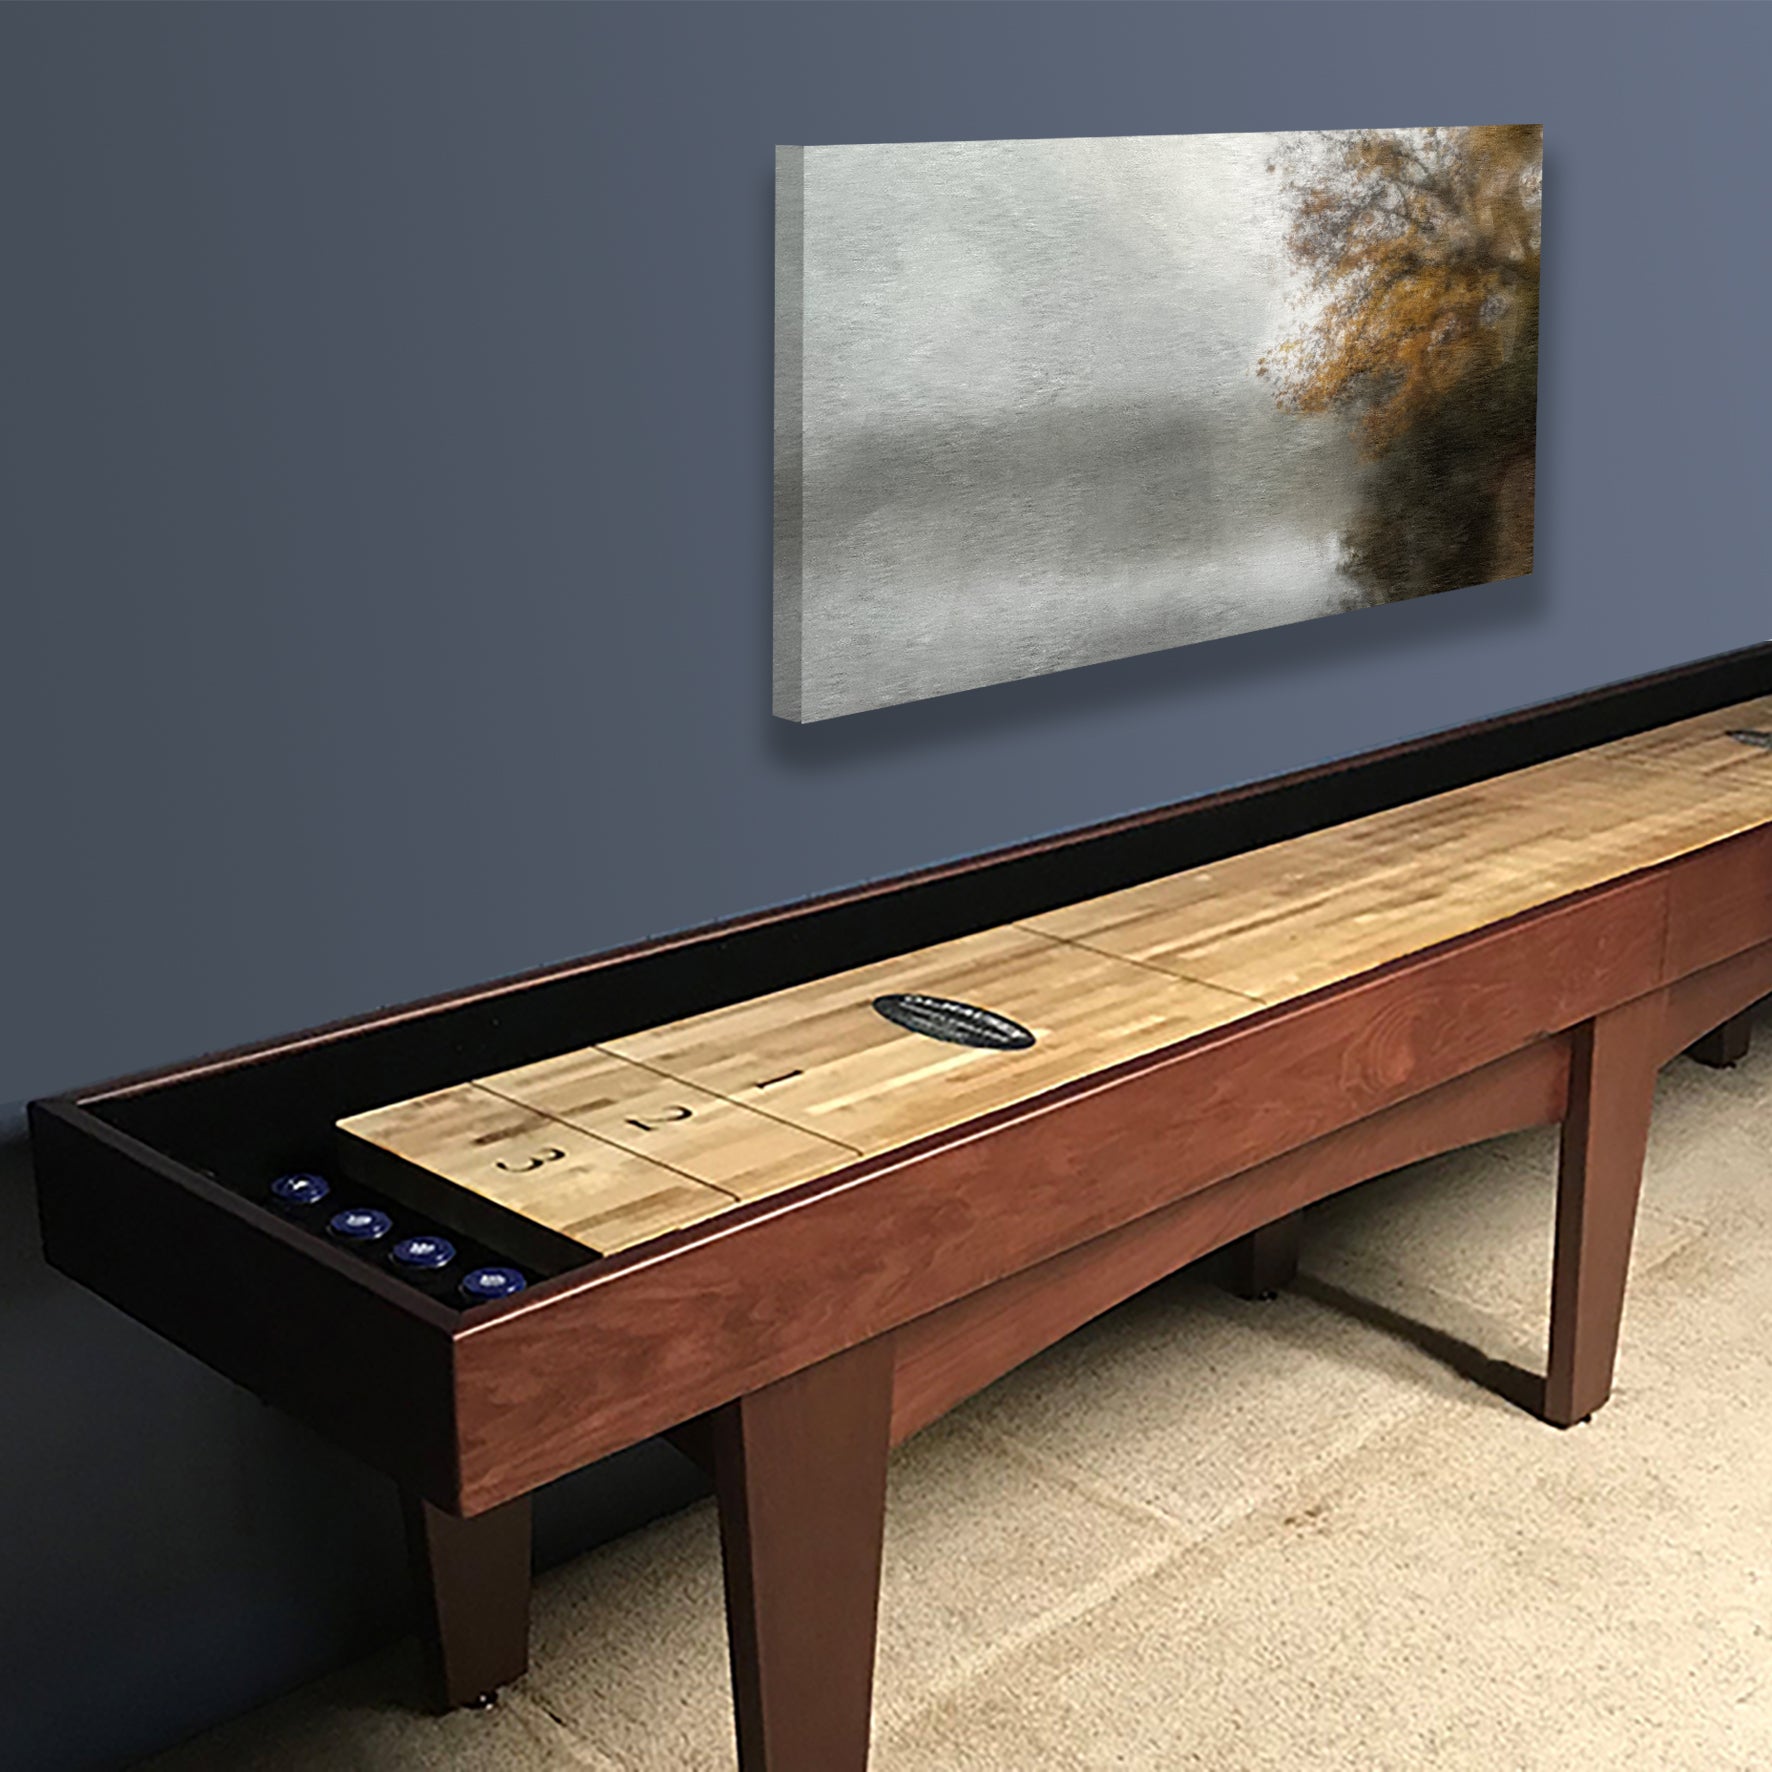 Pavilion hand-crafted Shuffleboard by Olhausen